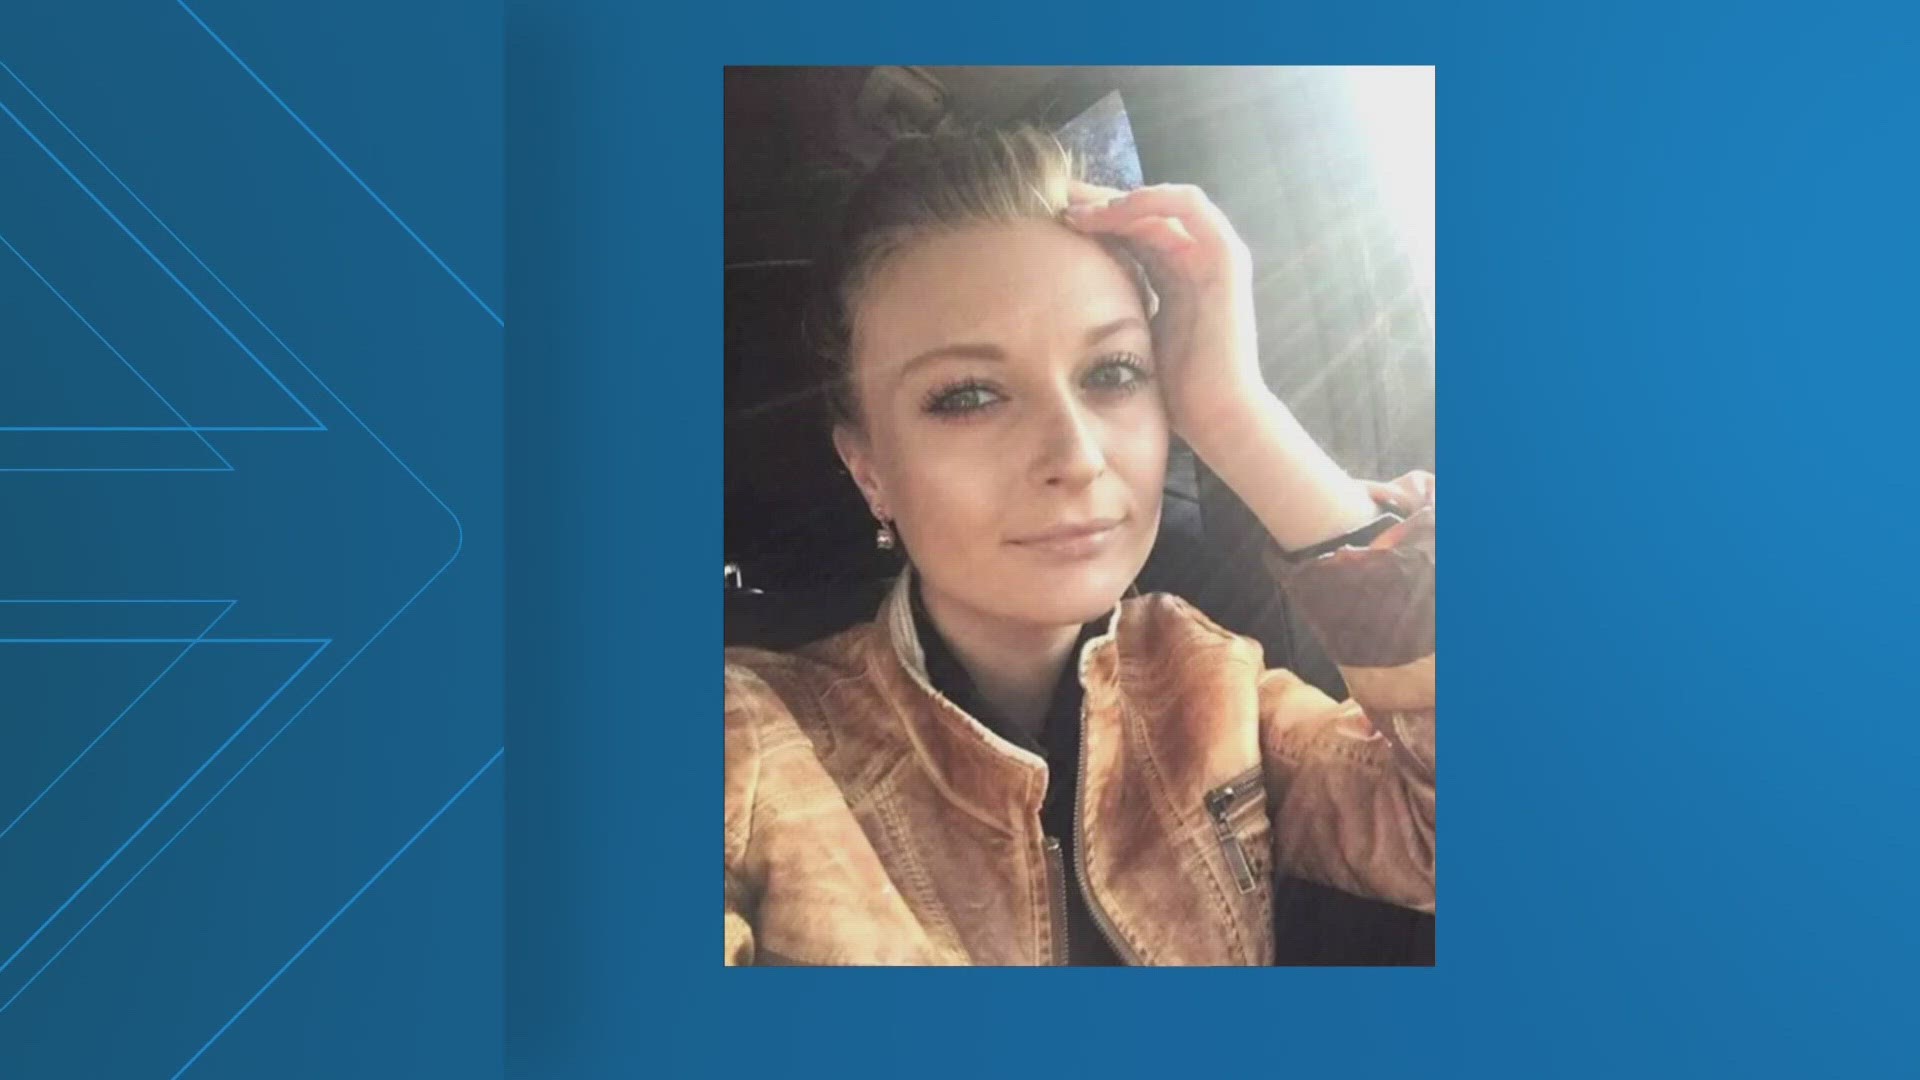 Sarah Harris, 25, was a former patient of Ryan’s, before becoming his employee and girlfriend. She suffered a deadly overdose in January of 2022.